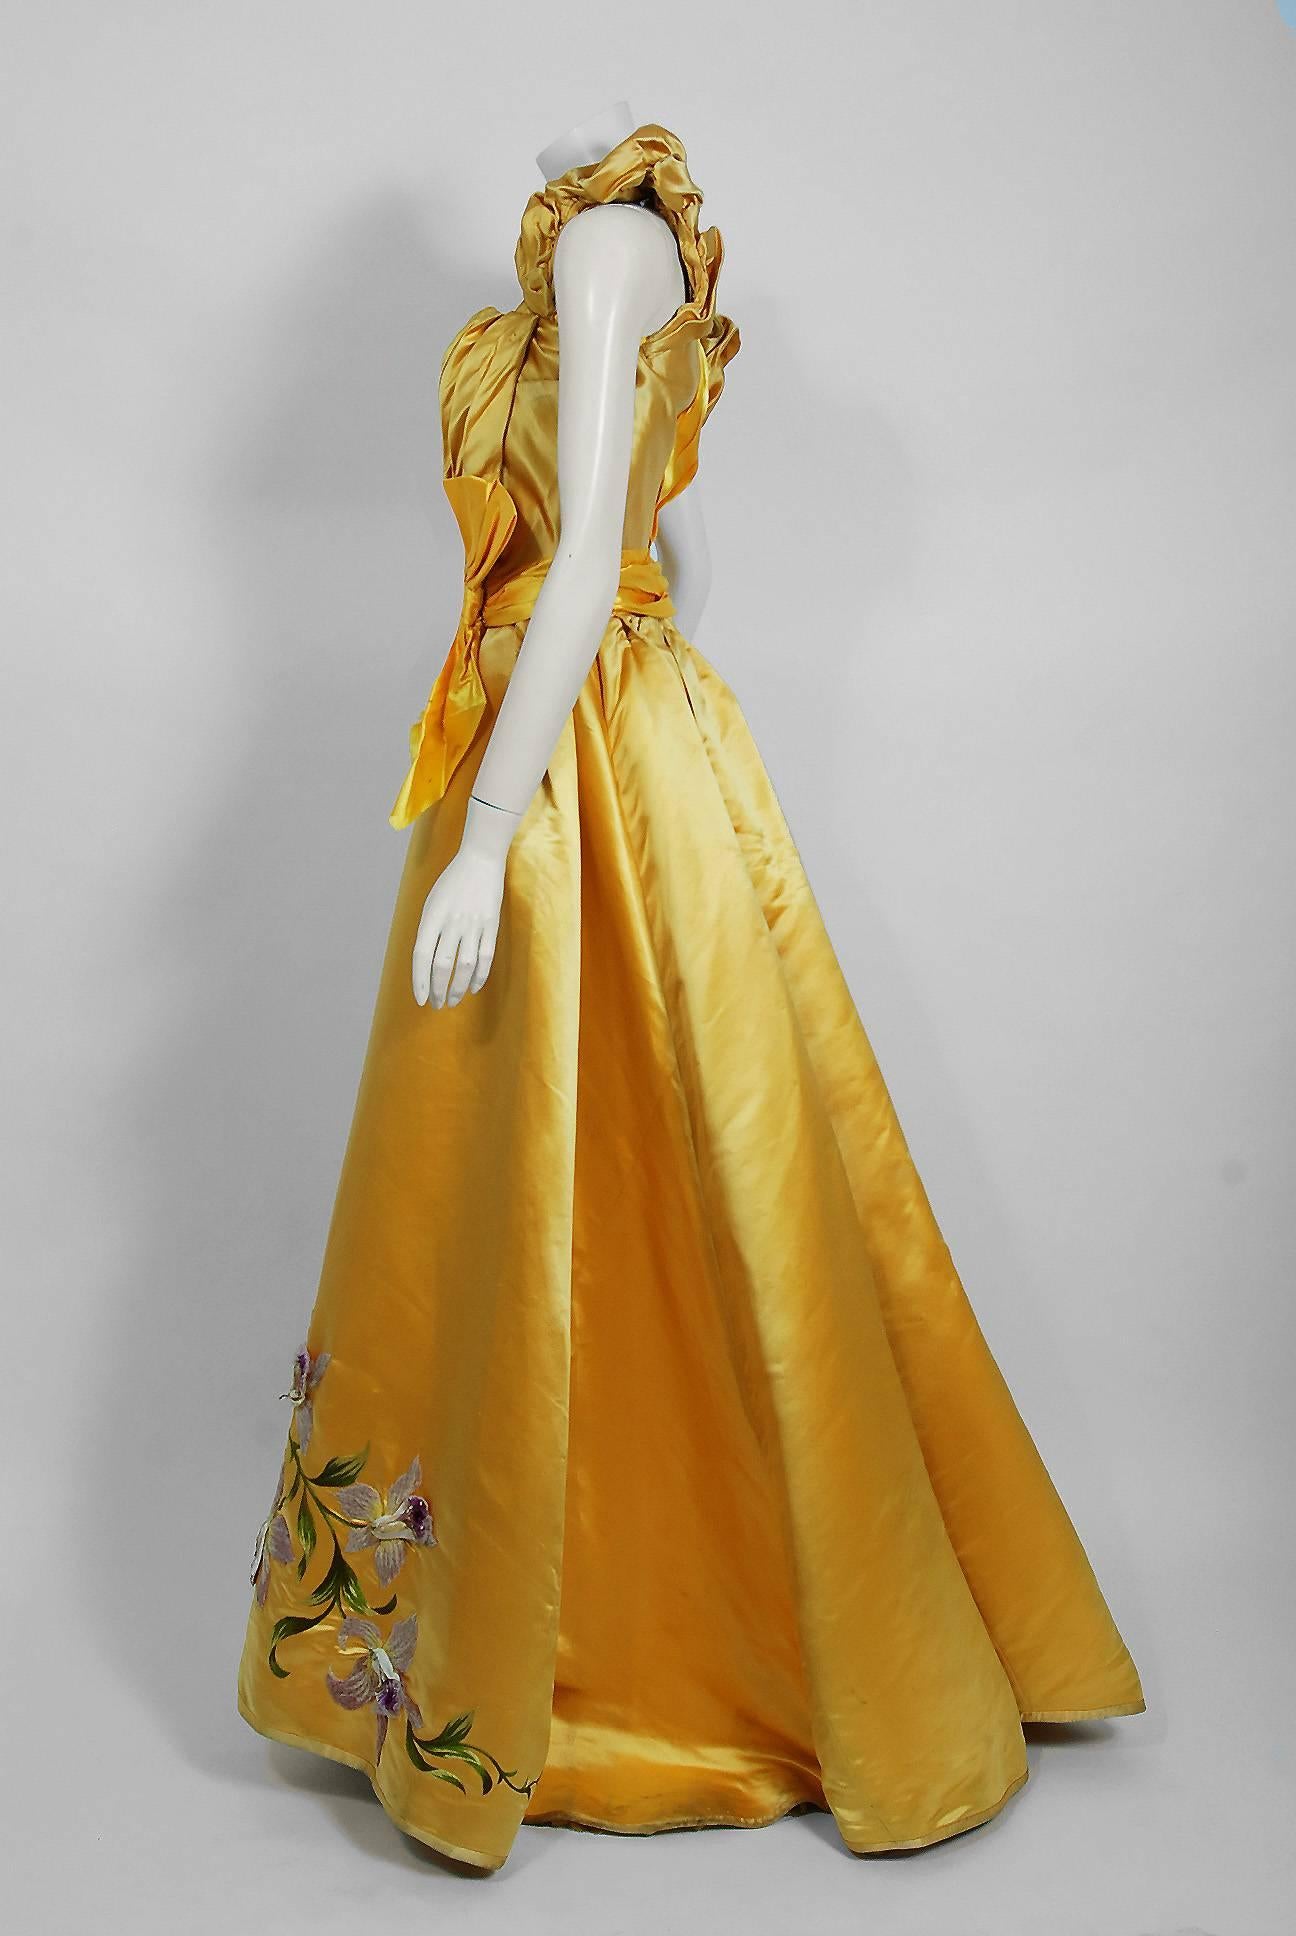 Undiminished by time, this 1895 Mme Arnaud on 16 Rue Bassano Paris couture ensemble still casts its seductive spell. An exceptional Victorian evening ensemble fashioned from vibrant sunshine yellow silk-satin. The gorgeous three-dimensional purple